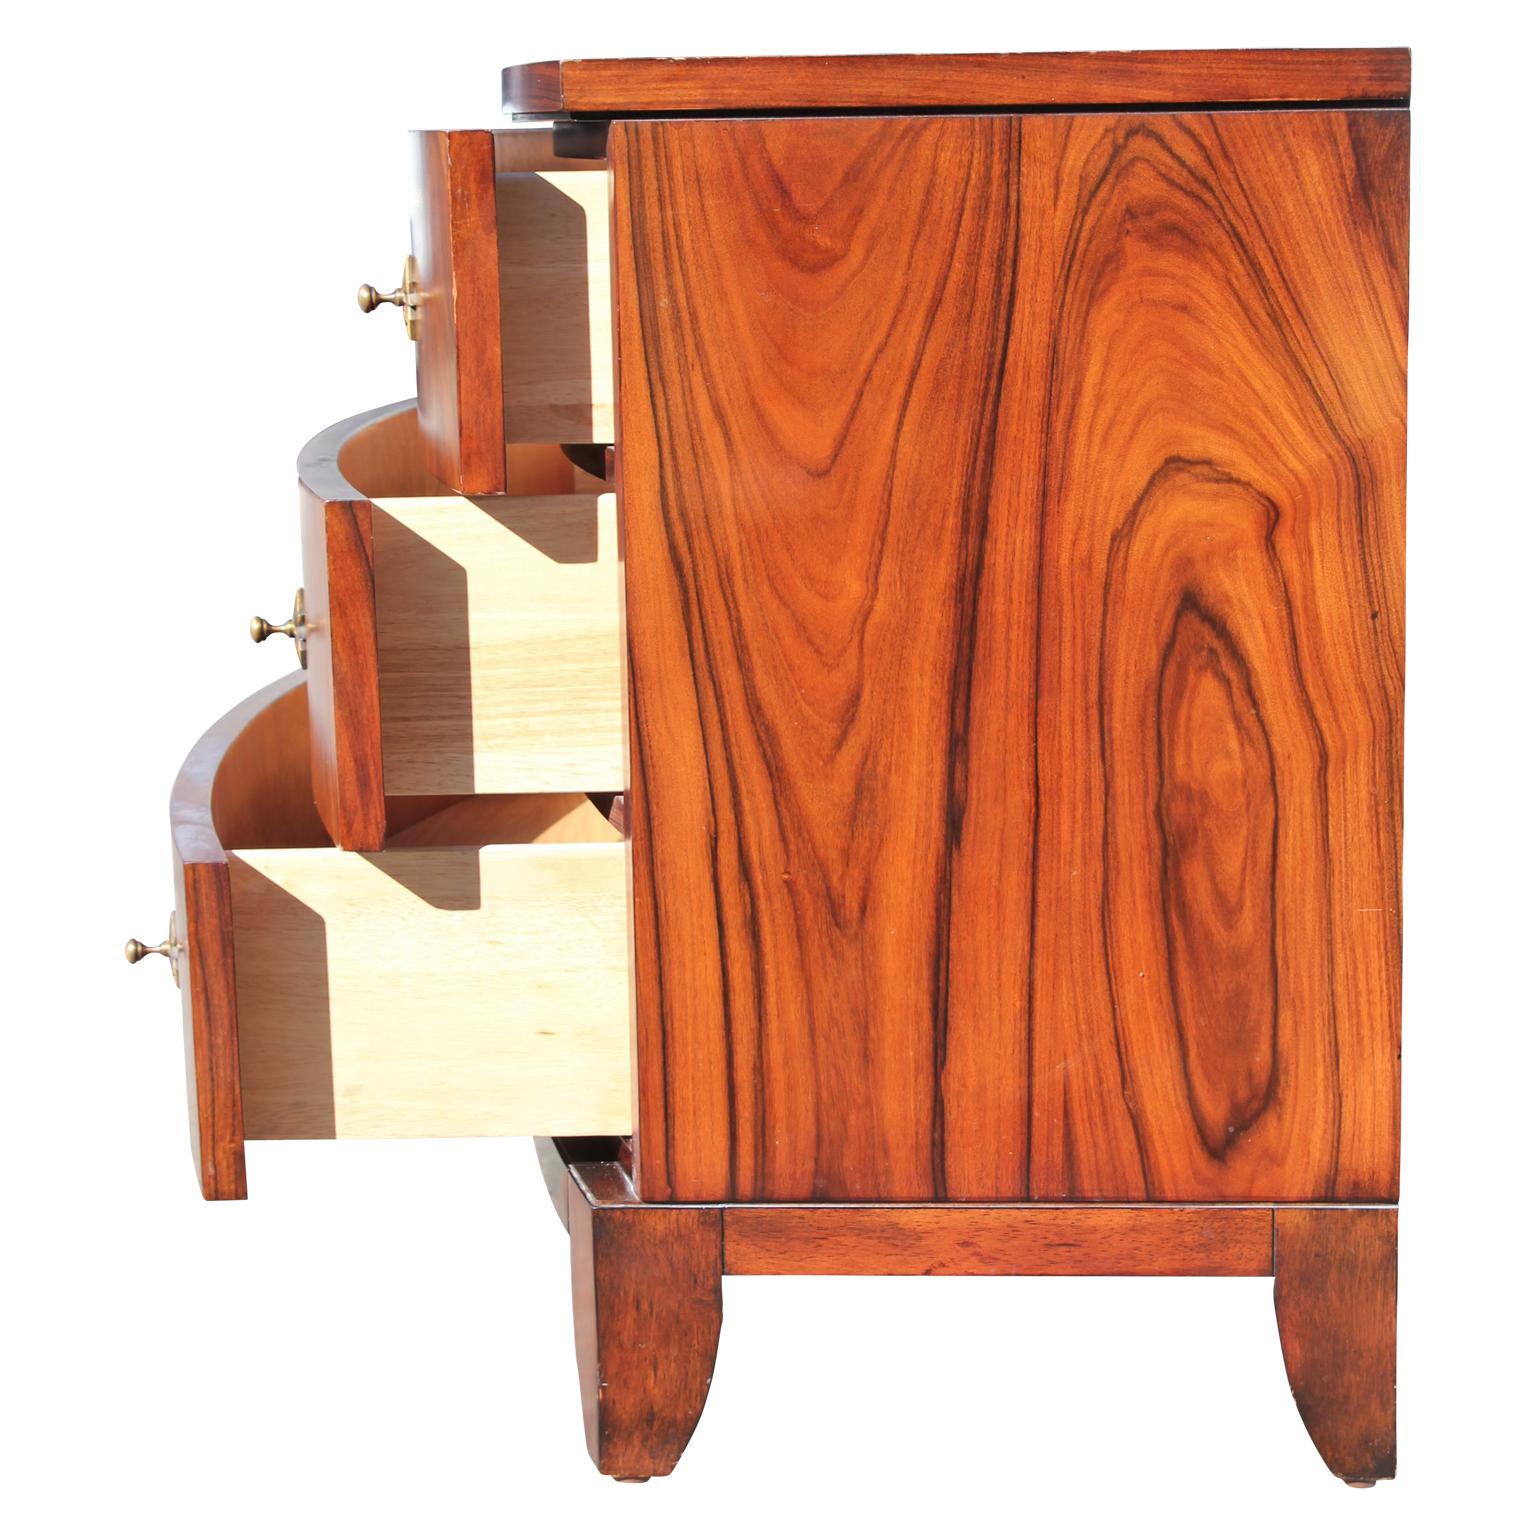 American Small Curved Modern Rosewood Three-Drawer Chest Bronze Color Starburst Hardware